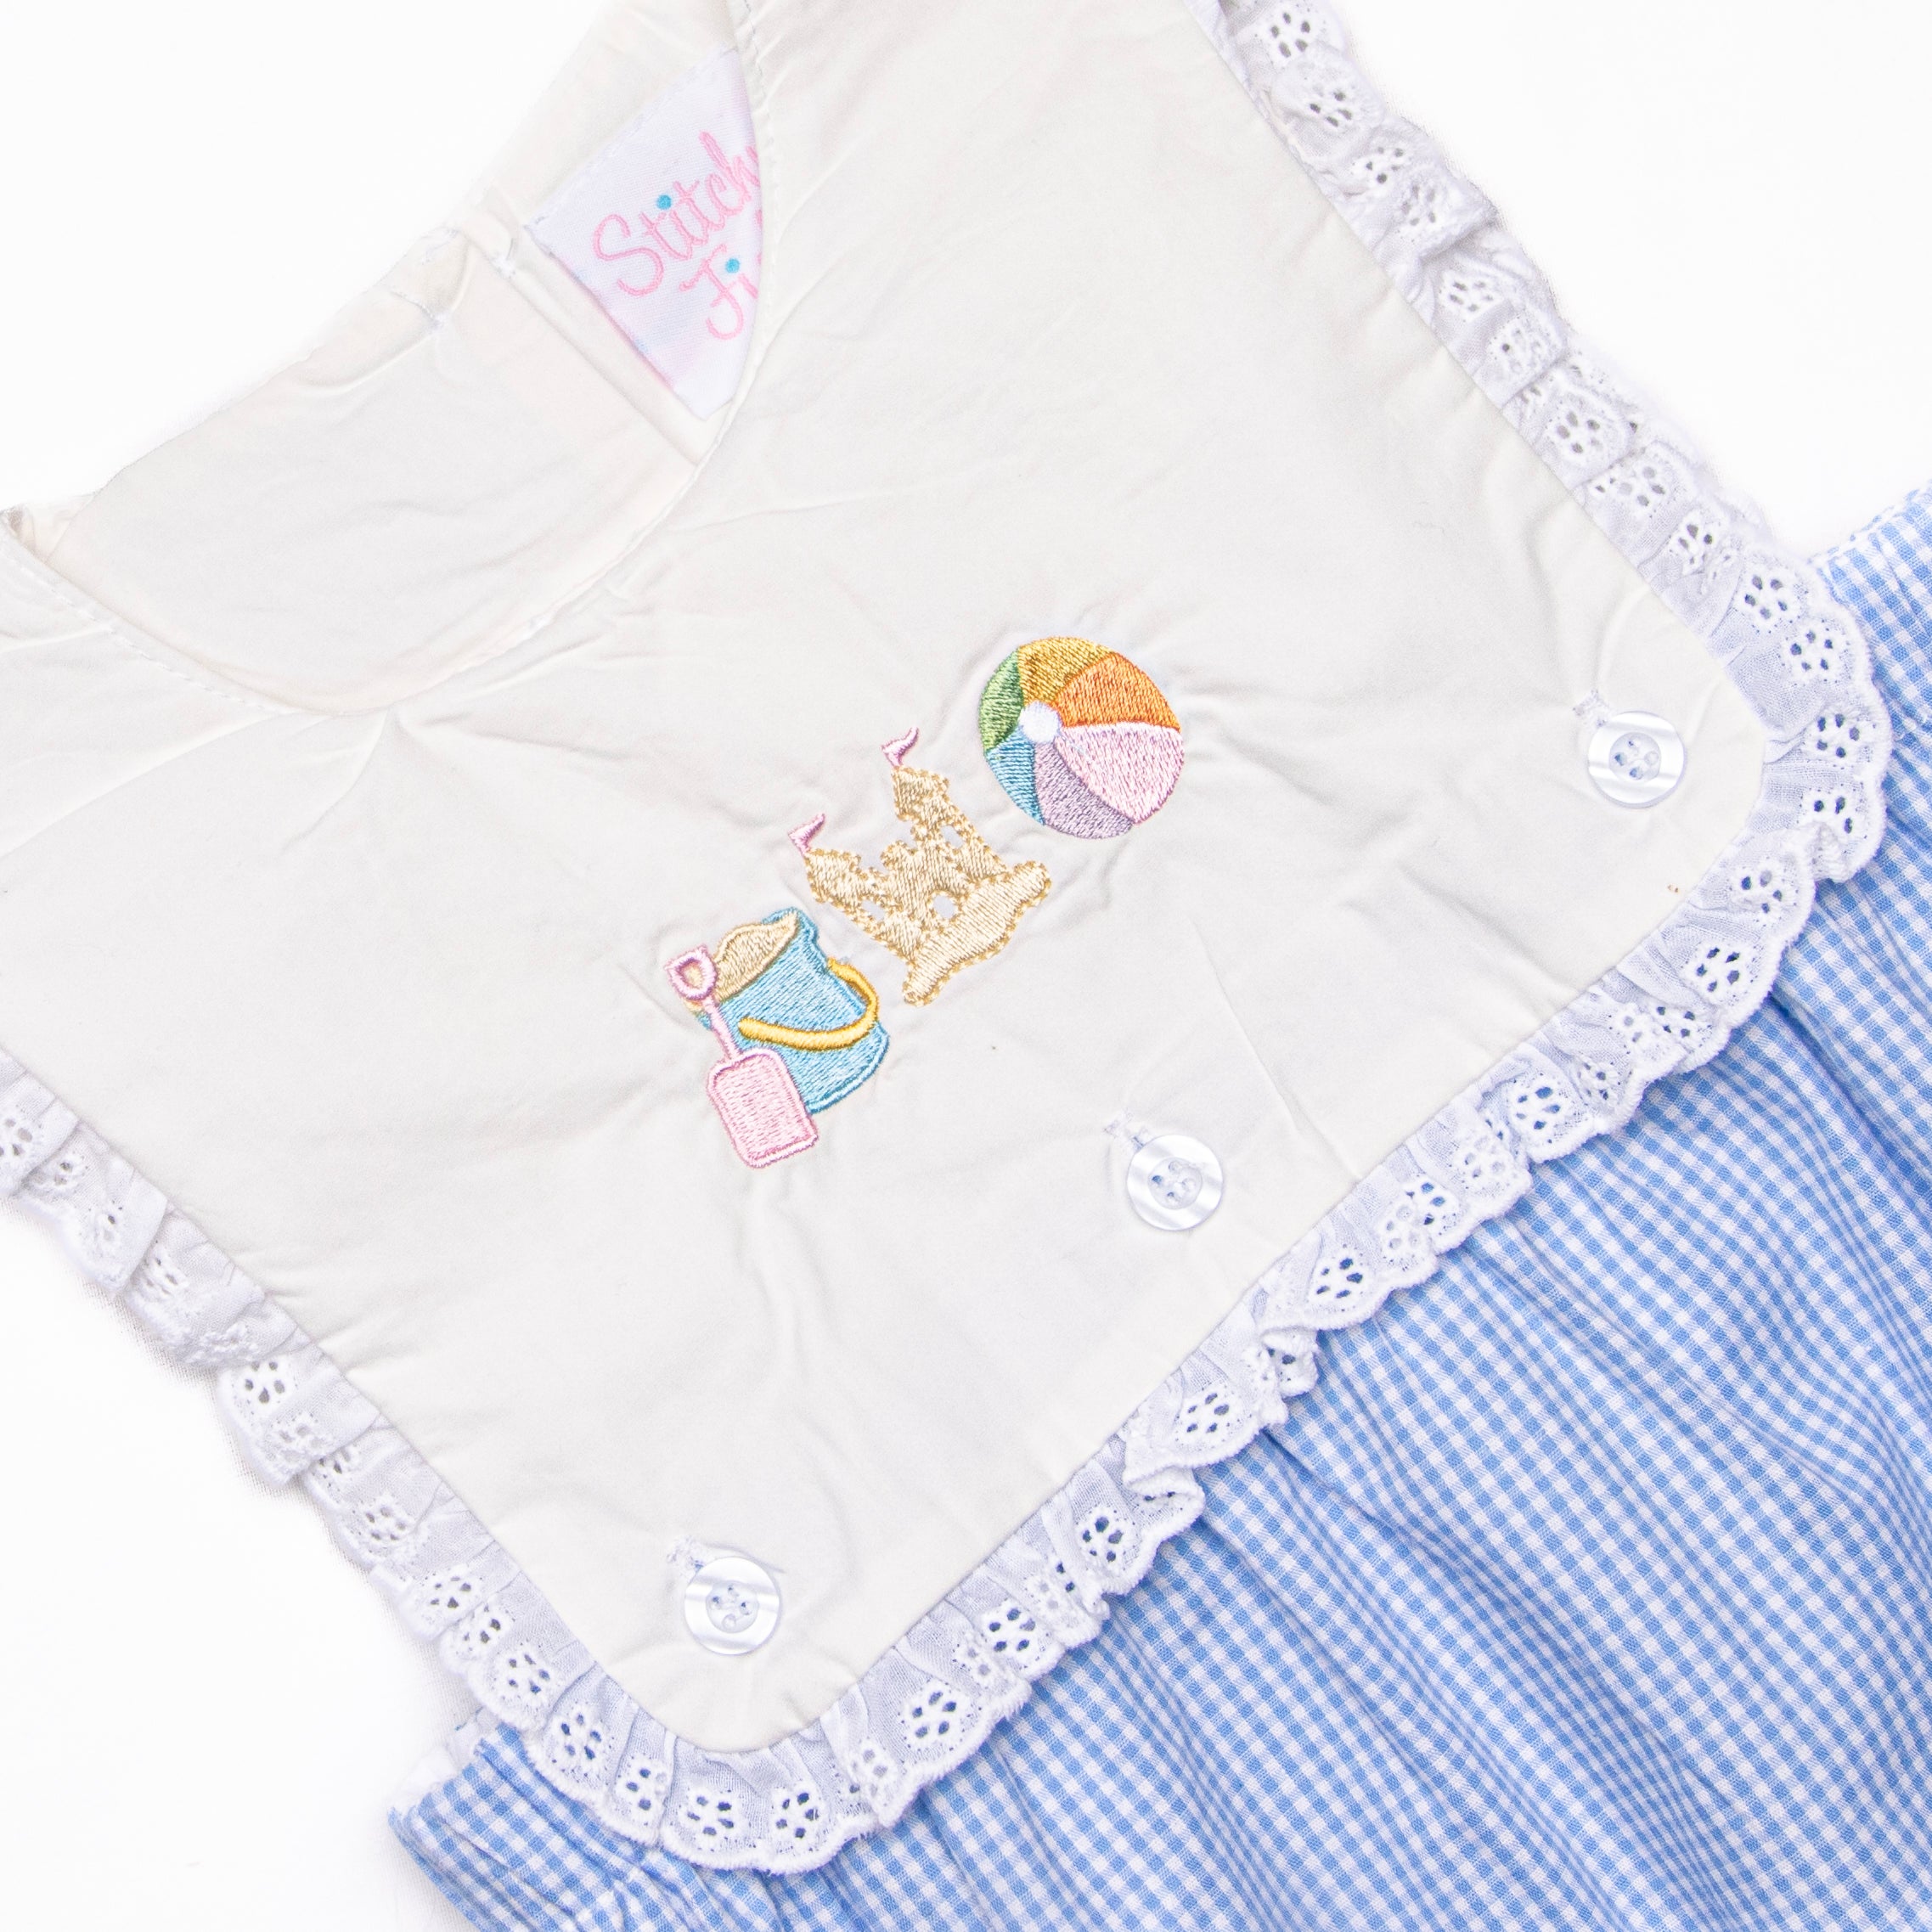 Day at the Beach Embroidered Dress, Blue – Stitchy Fish